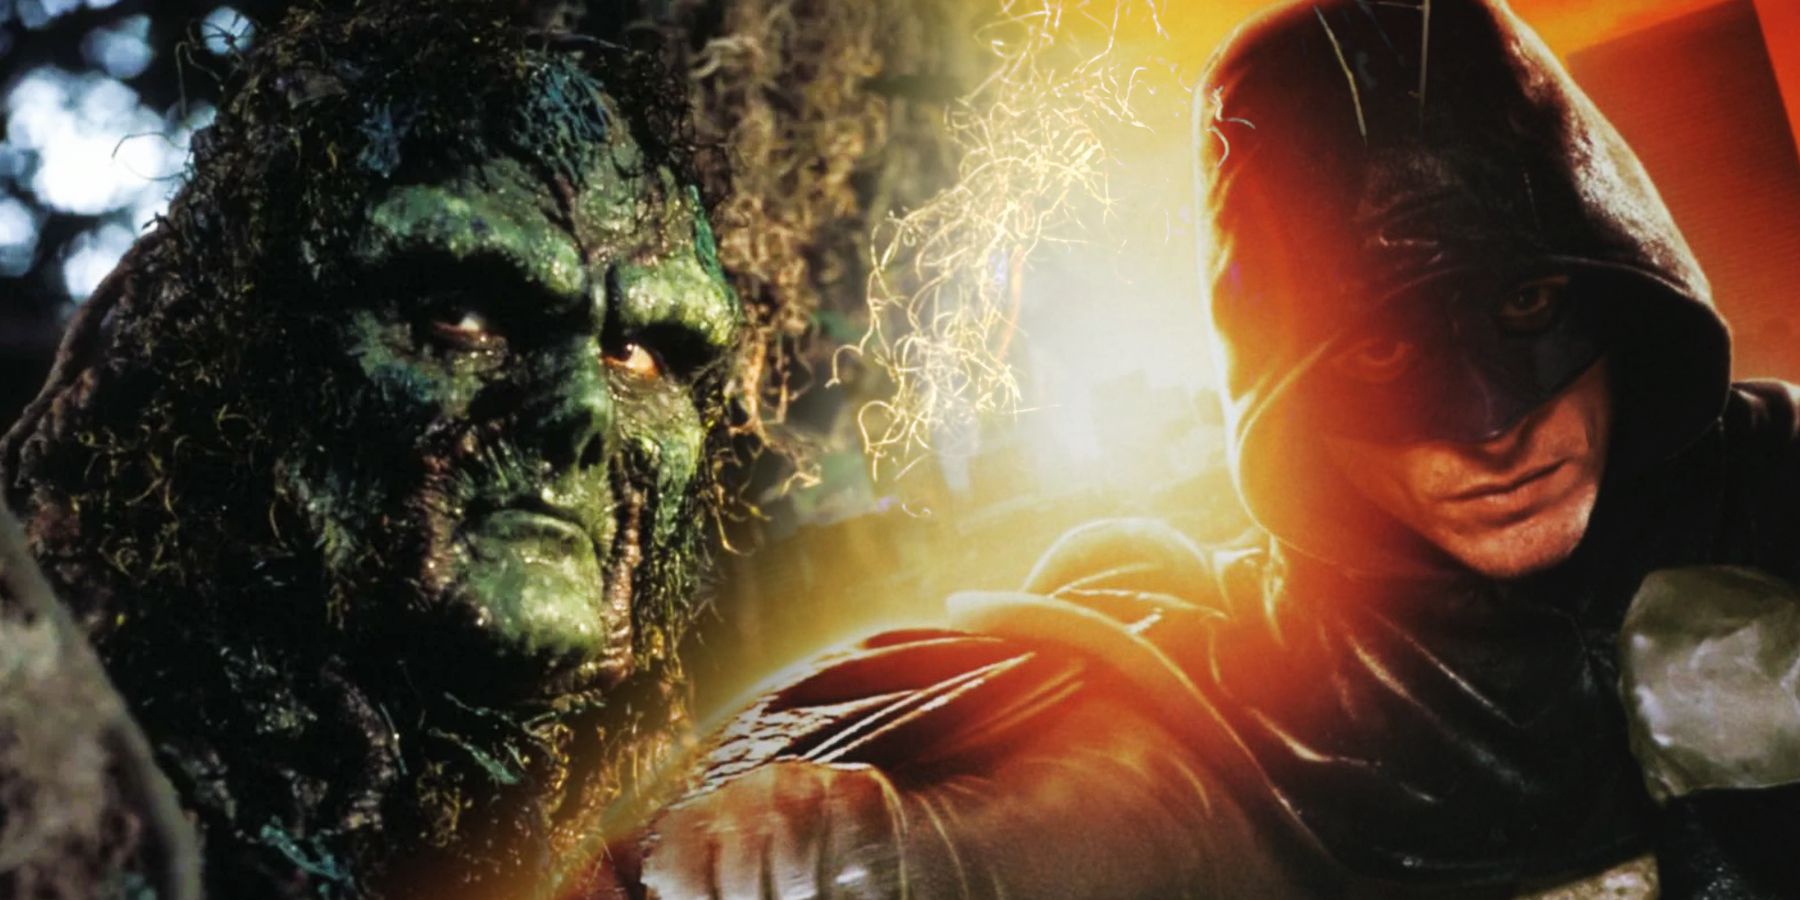 A split image of the 80s Swamp Thing and a superhero from the show The Cape